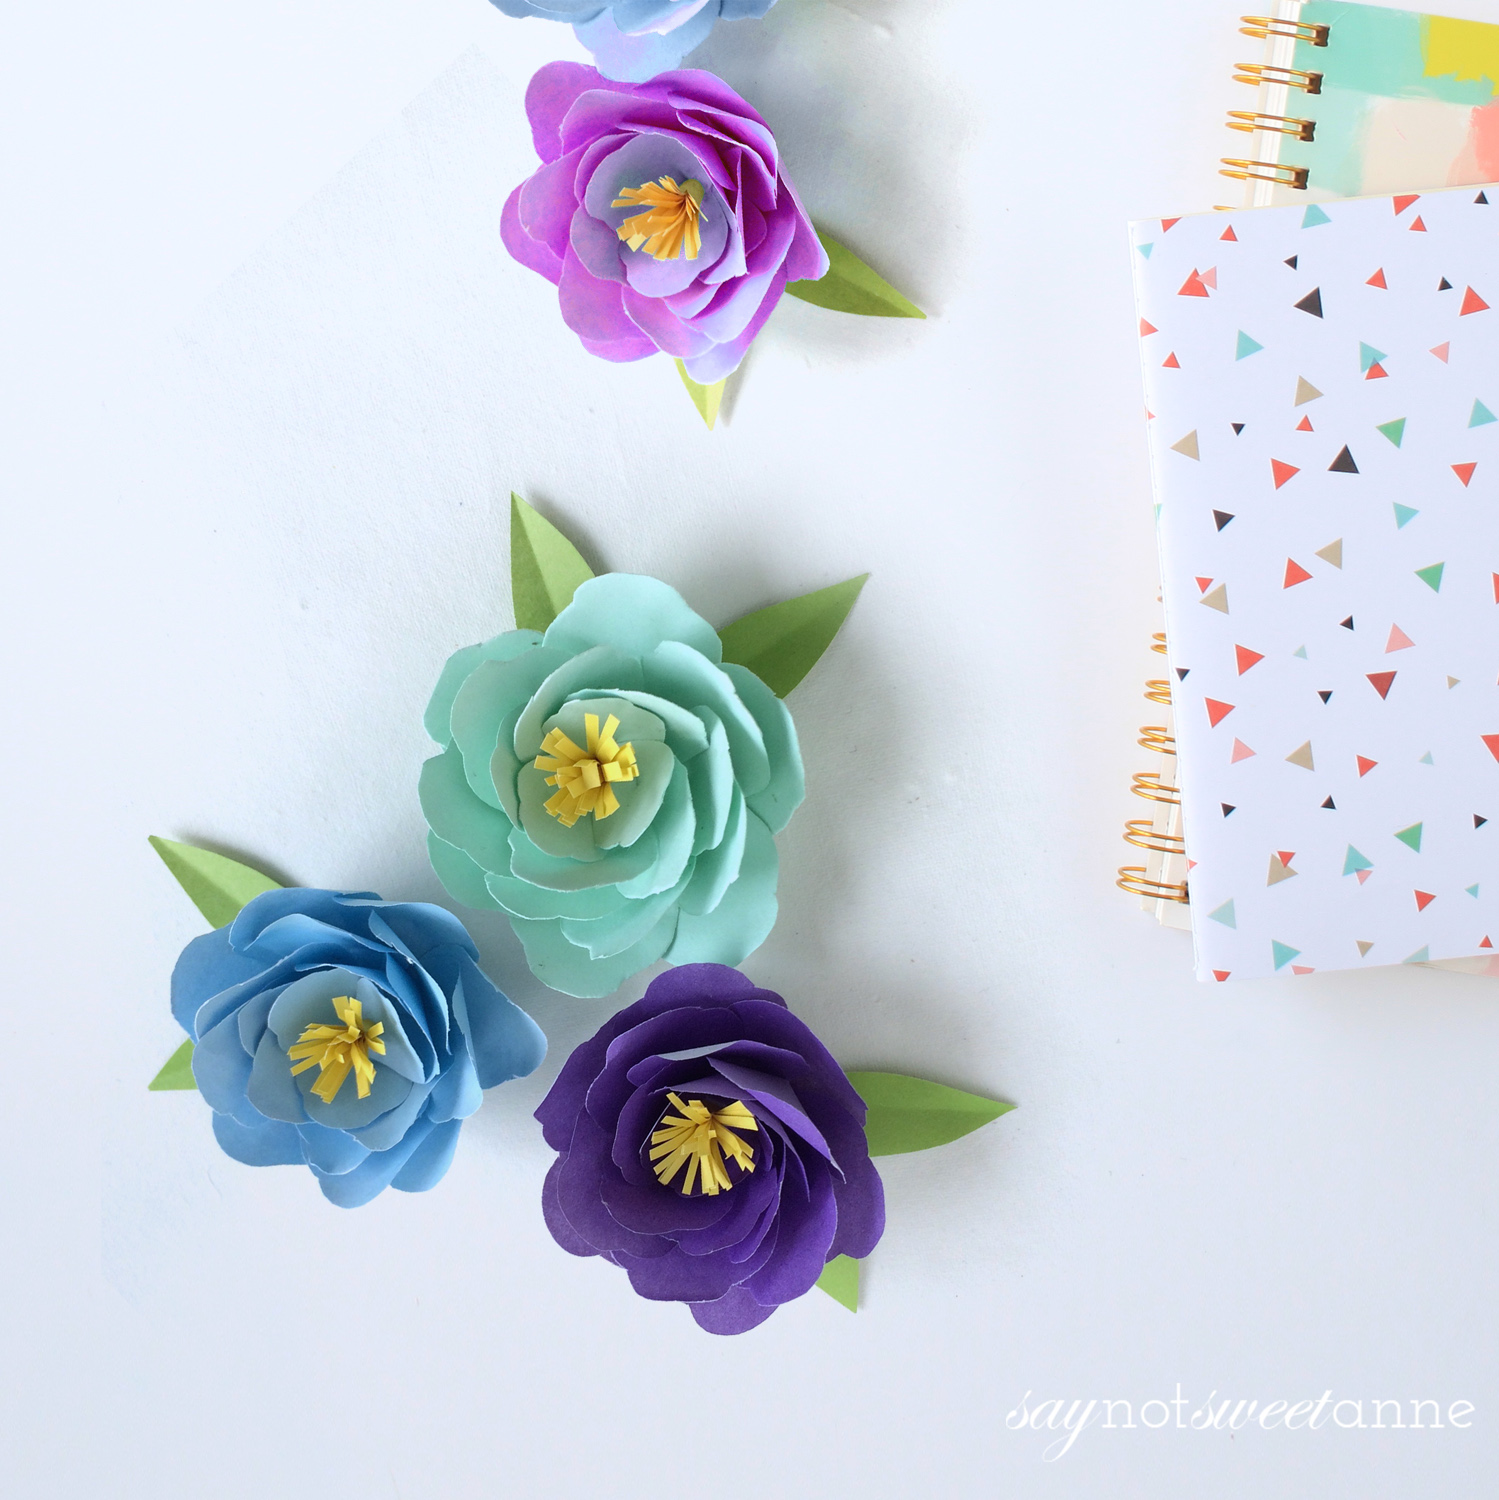 Make beautiful Peony flowers using just paper. Perfect for decor, kids crafts, baby and wedding showers - the works! | saynotsweetanne.com